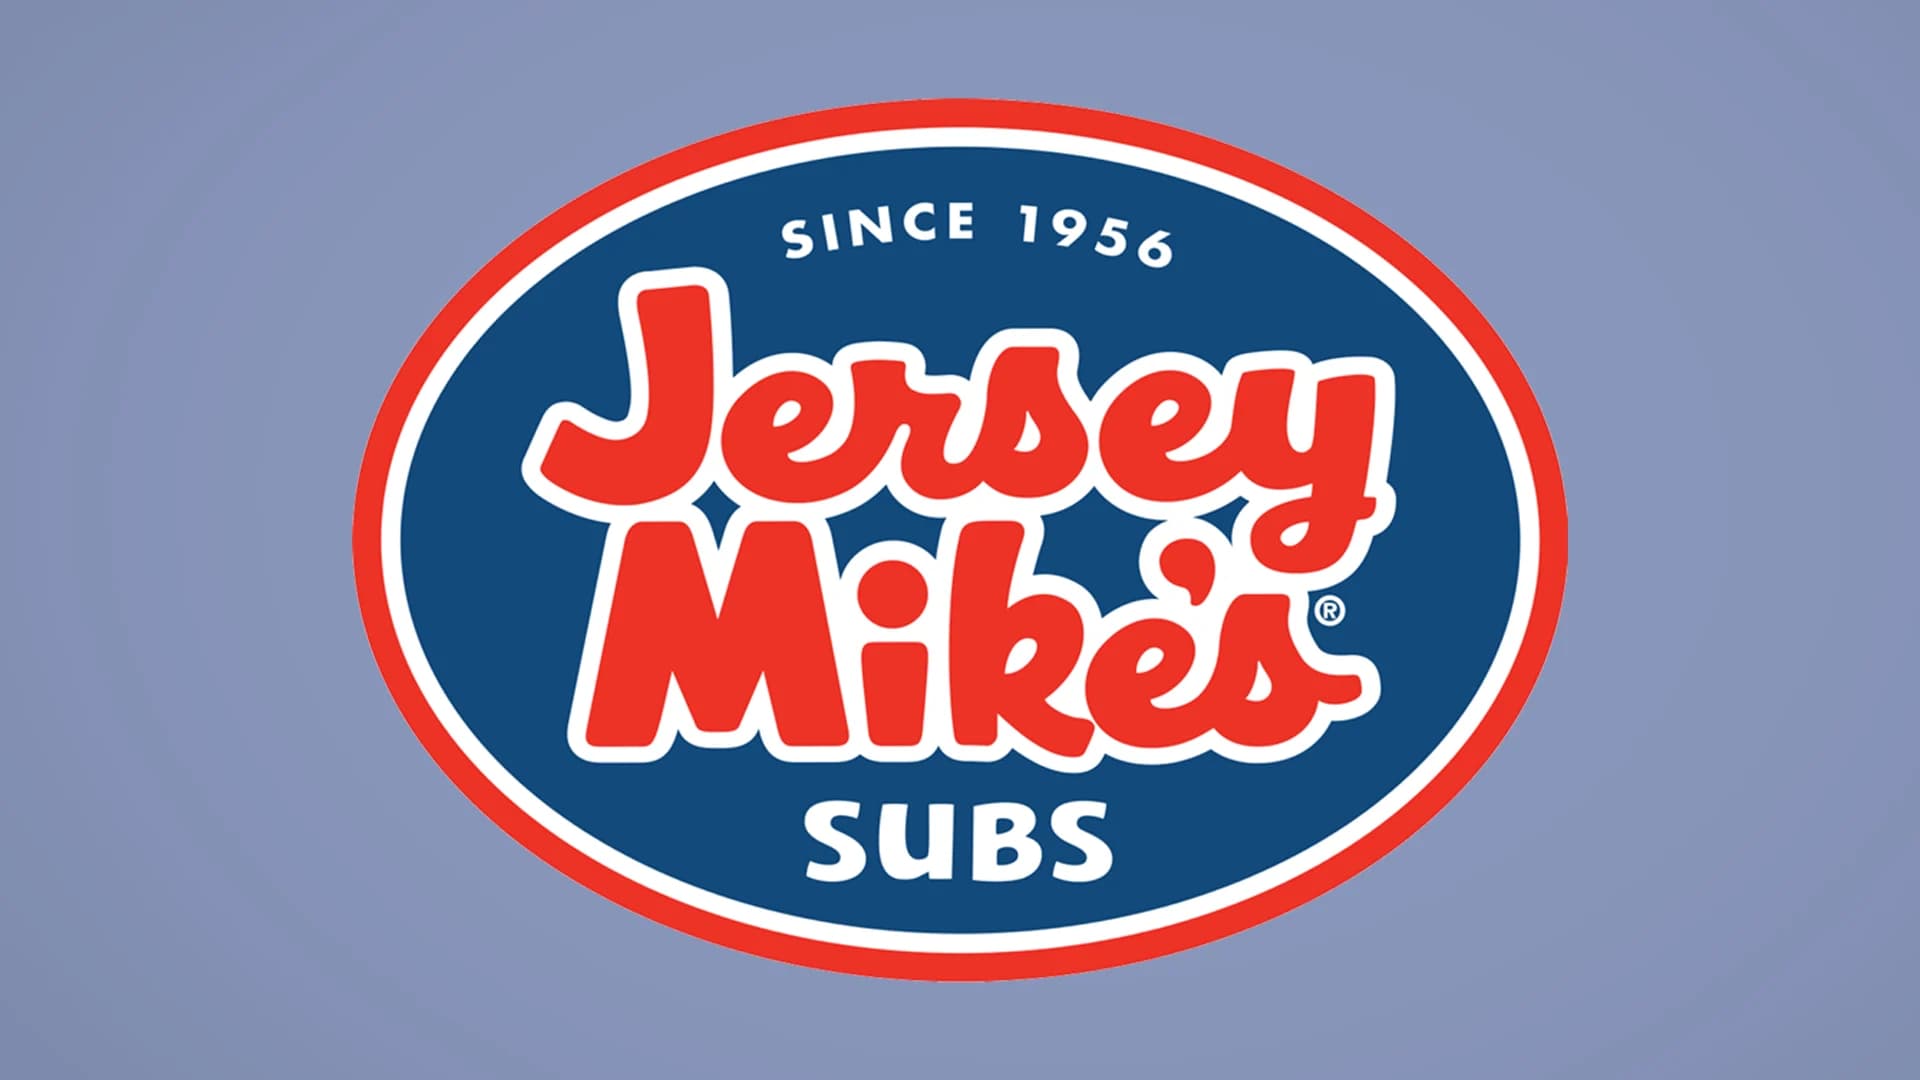 Next Wednesday is Jersey Mike's 11th annual nationwide Day of Giving 